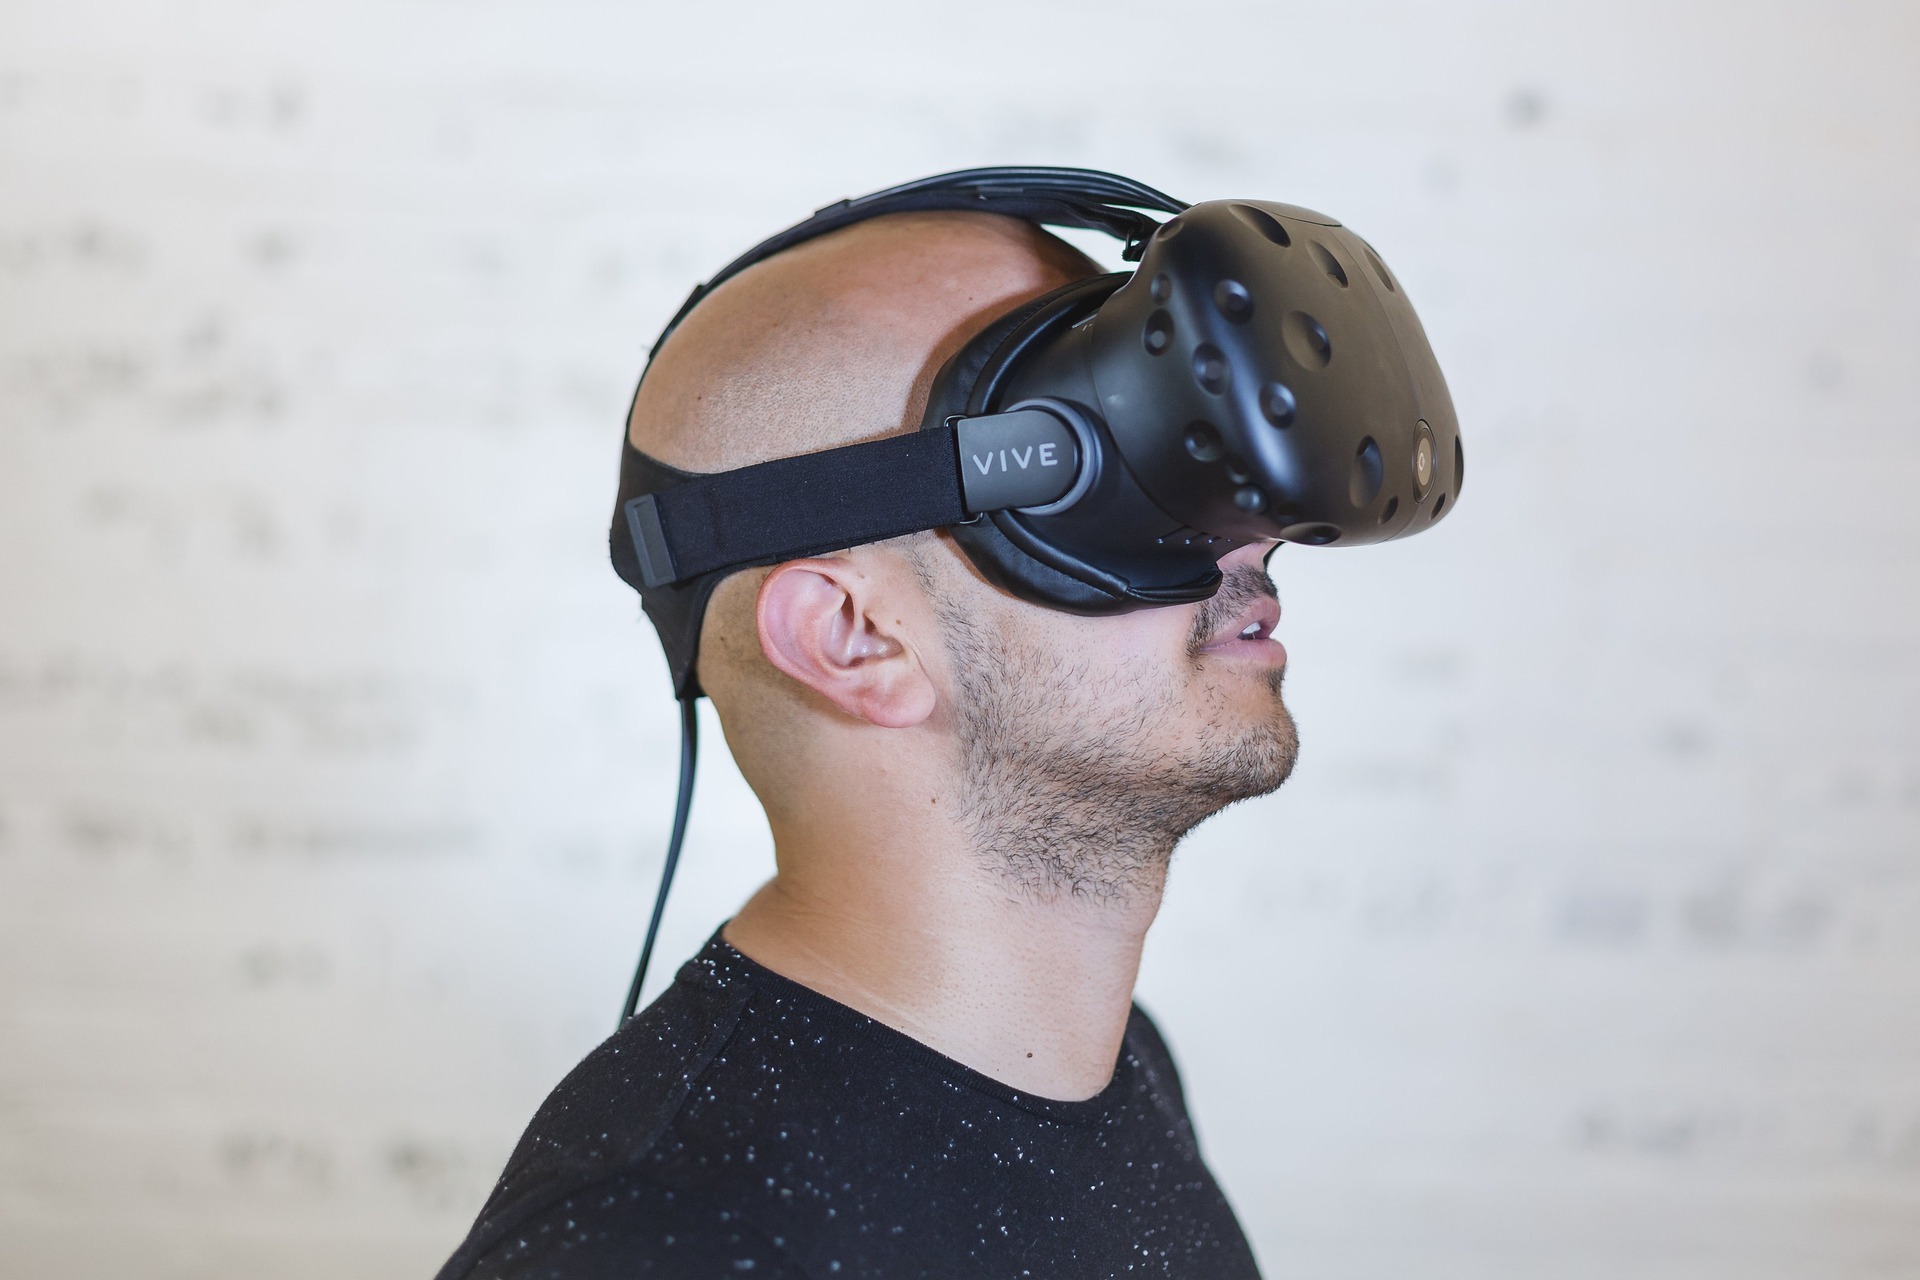 Immersive Experiences Can Scale Your Business – The 5 Ways Virtual Reality Can Save Your Business Time and Money